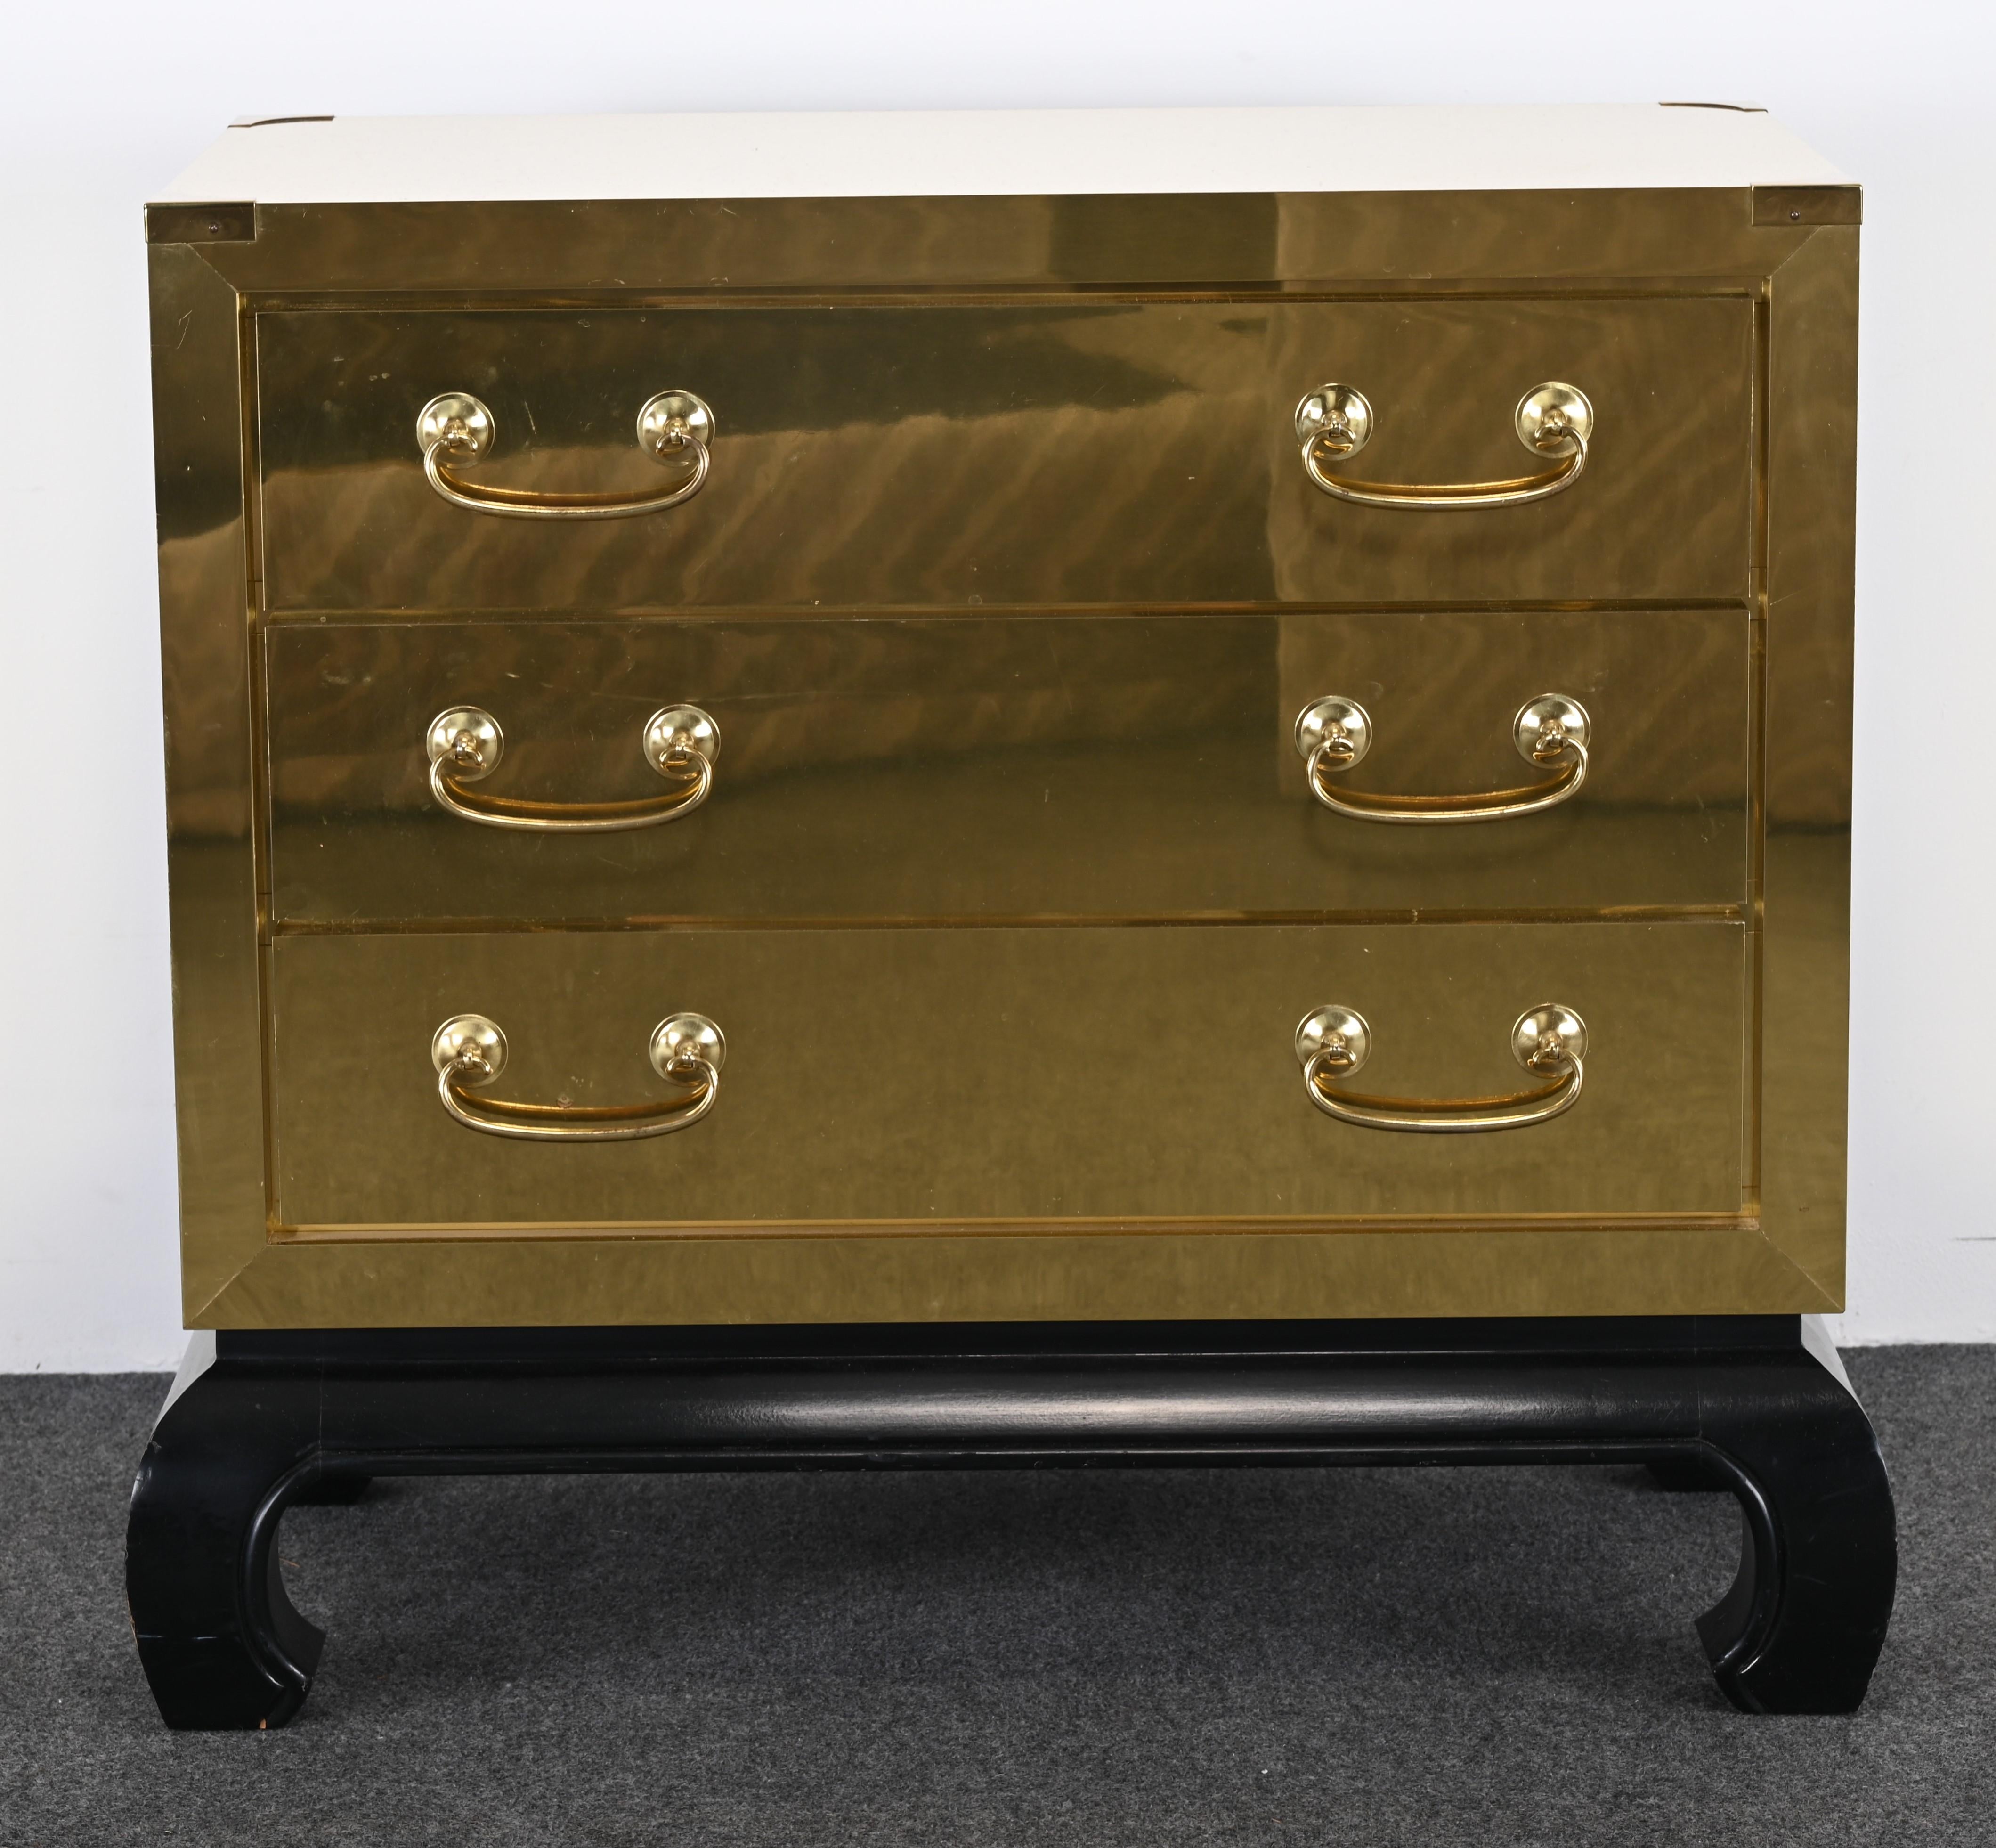 A handsome Brass Clad Asian style chest of drawers in the manner of Sarreid, LTD. This distinctive brass chest would add a touch of glamour or elegance to any interior. It would look great with Mid-Century Modern or Traditional. Brass handles are